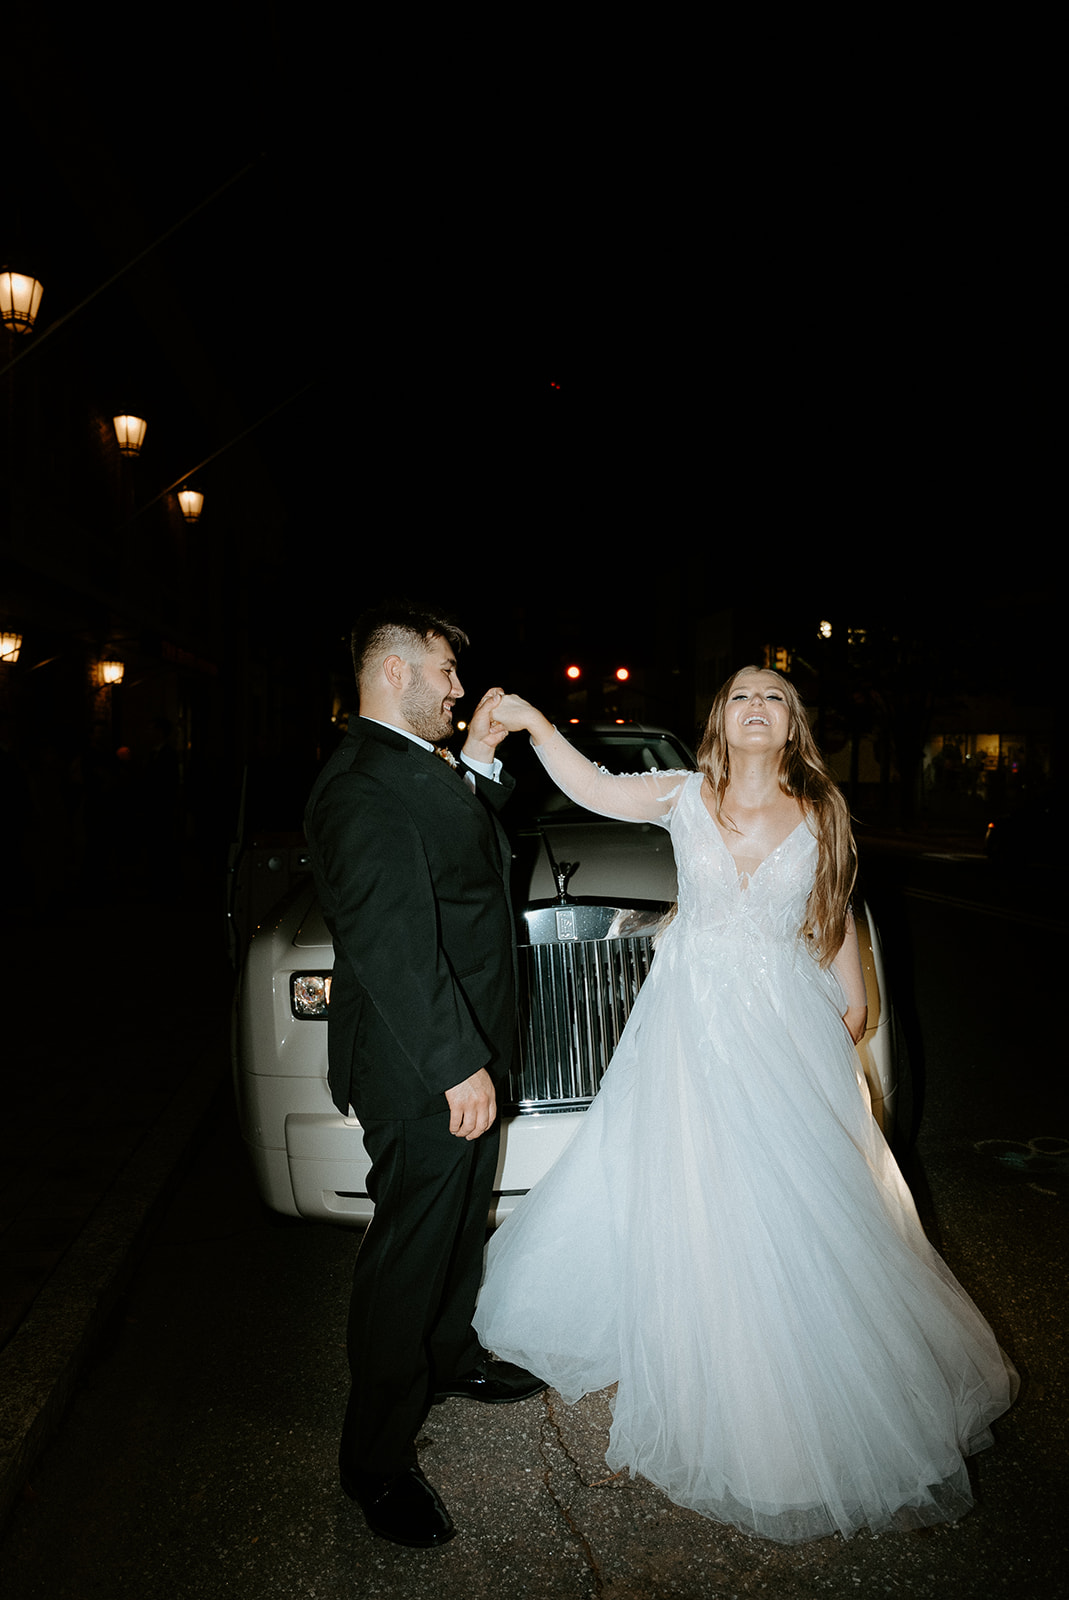 Getaway car for wedding, captured by Charlotte Wedding Photographers and Videographers in North Carolina